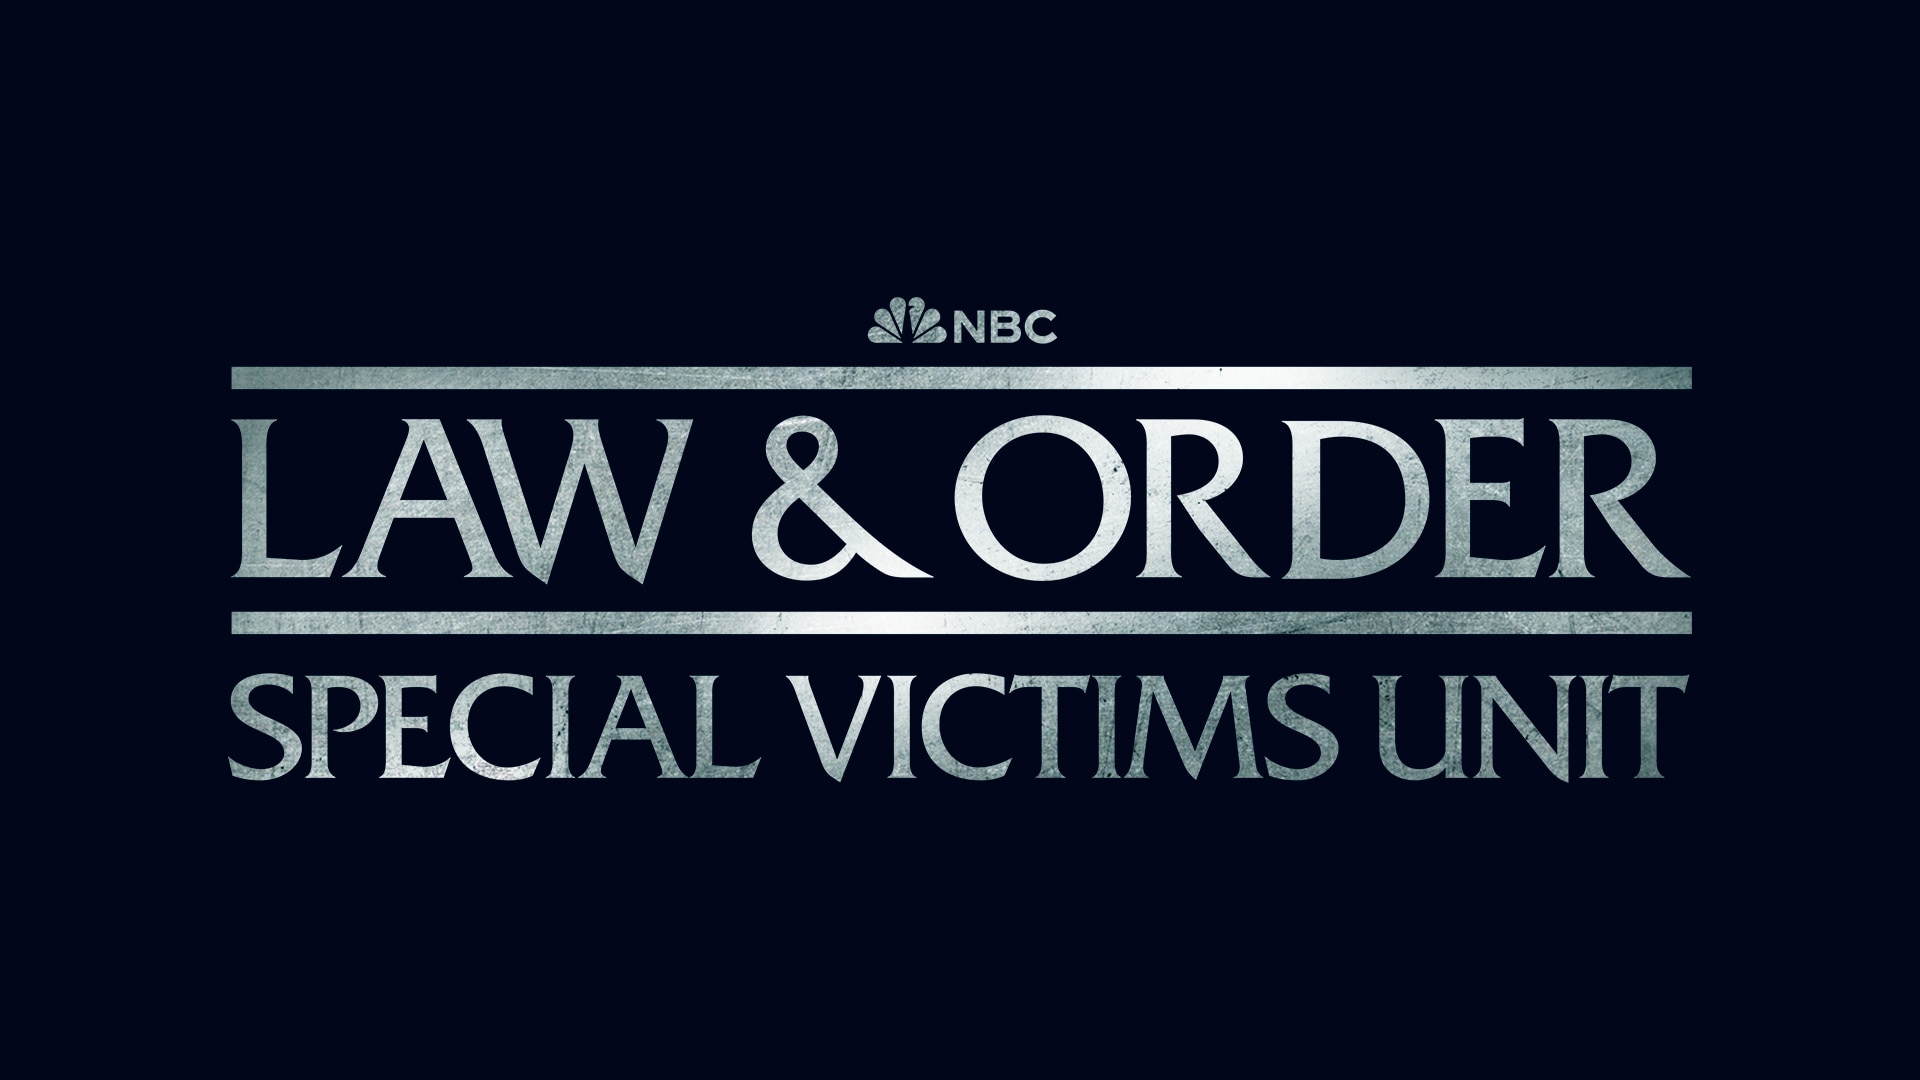 Steam law and order фото 34